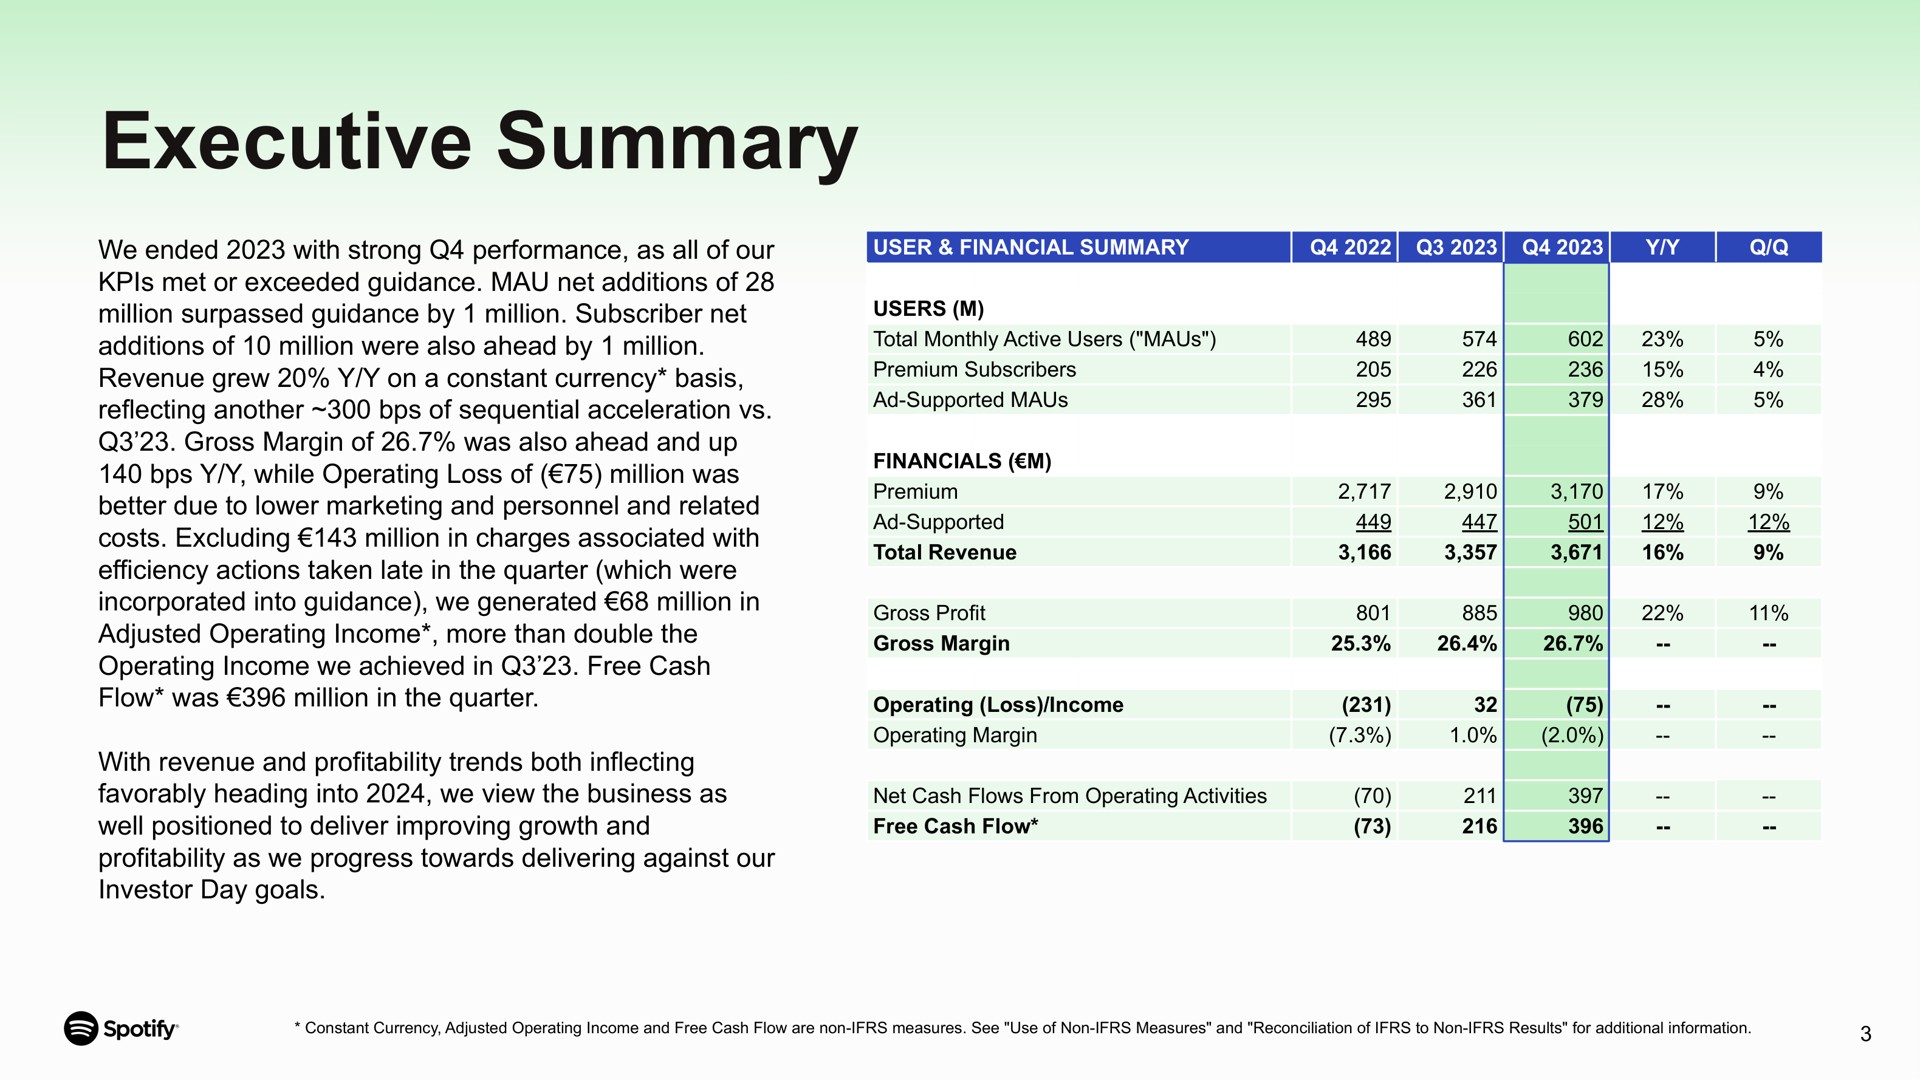 executive summary we ended with strong performance as all of our met or exceeded guidance mau net additions of million surpassed guidance by million subscriber net additions of million were also ahead by million revenue grew on a constant currency basis reflecting another of sequential acceleration gross margin of was also ahead and up while operating loss of million was better due to lower marketing and personnel and related costs excluding million in charges associated with efficiency actions taken late in the quarter which were incorporated into guidance we generated million in adjusted operating income more than double the operating income we achieved in free cash flow was million in the quarter with revenue and profitability trends both inflecting favorably heading into we view the business as well positioned to deliver improving growth and profitability as we progress towards delivering against our investor day goals | Spotify